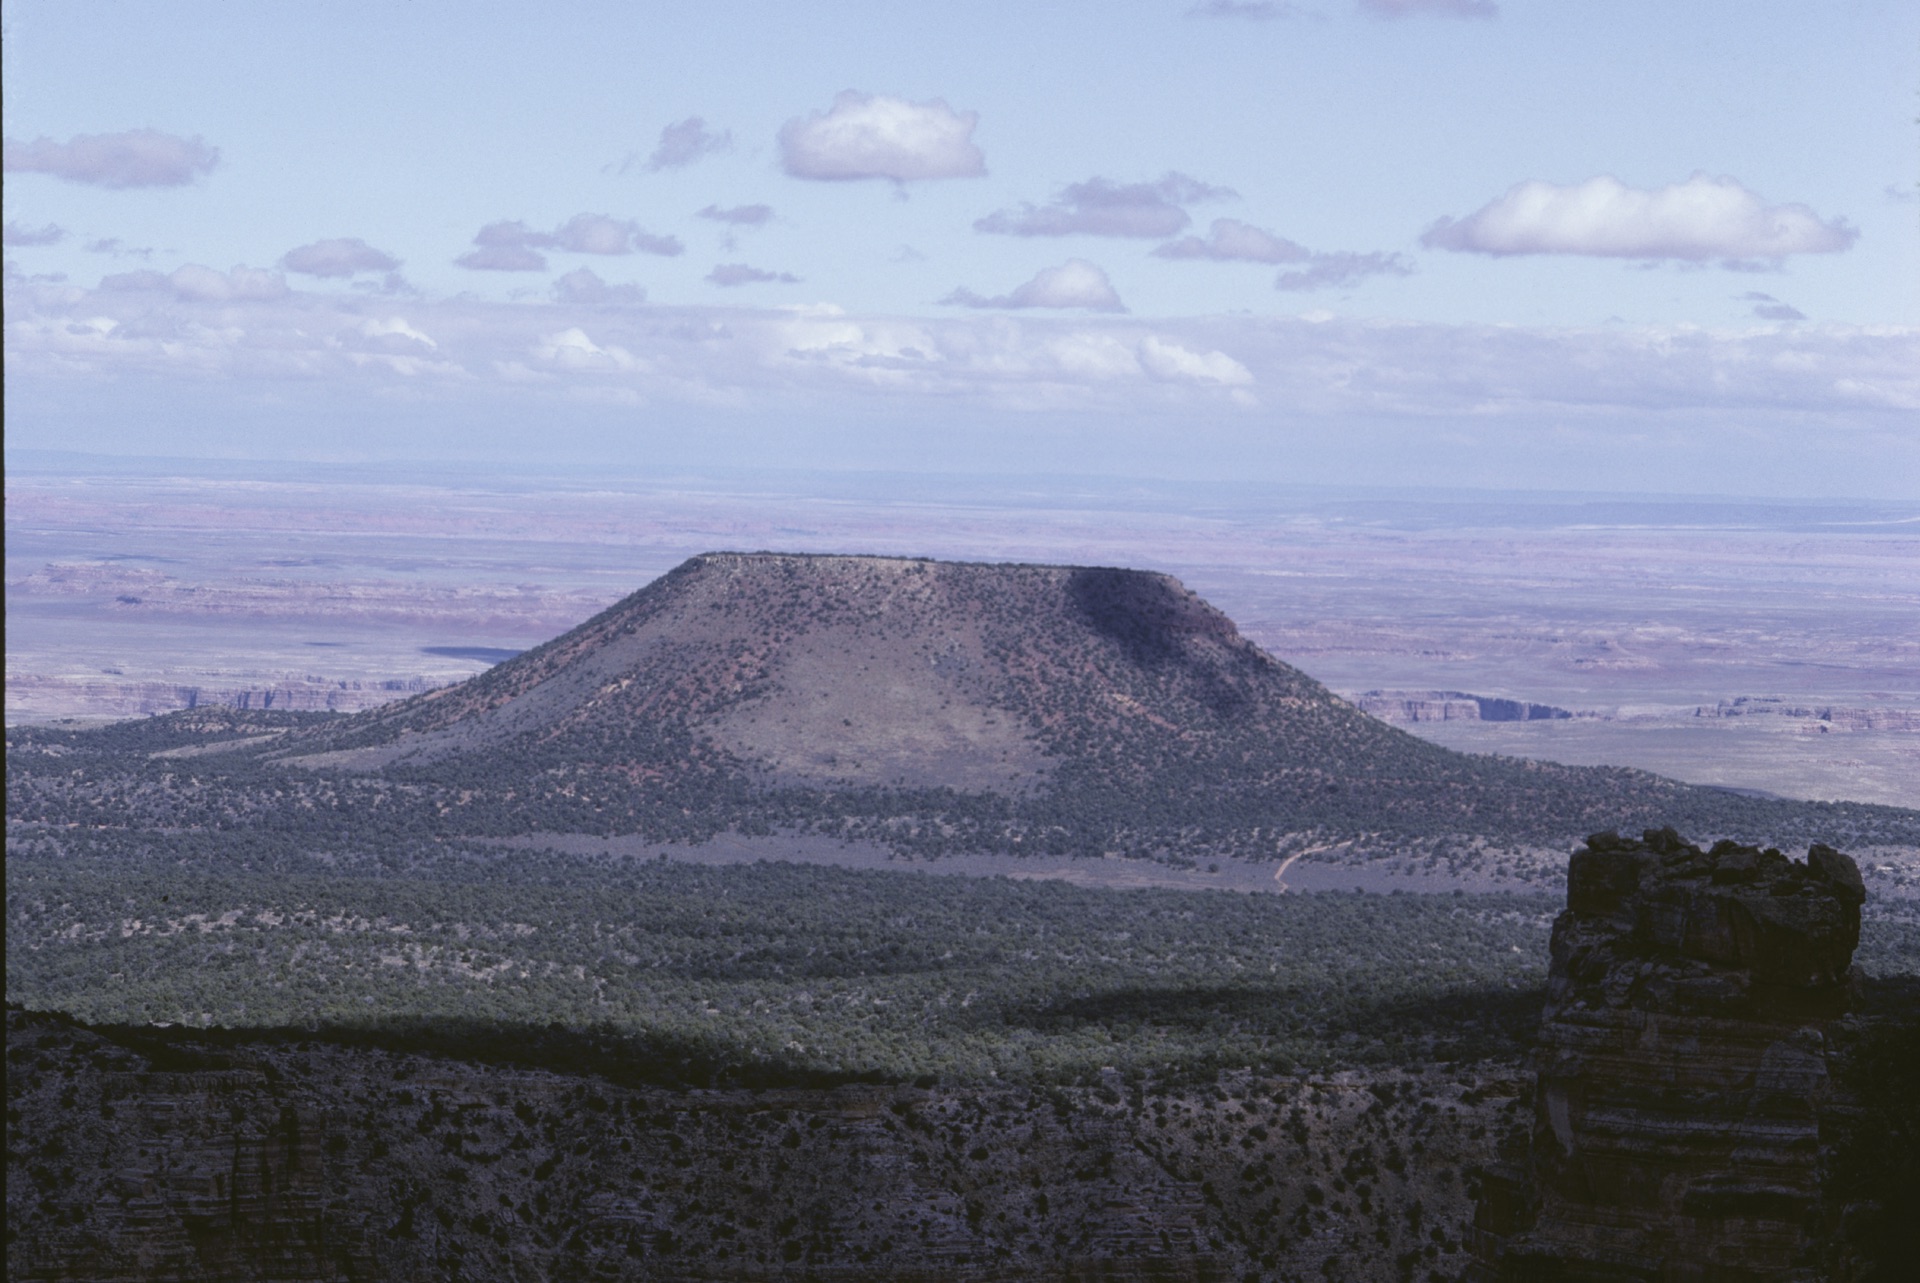 Butte and Painted Desert